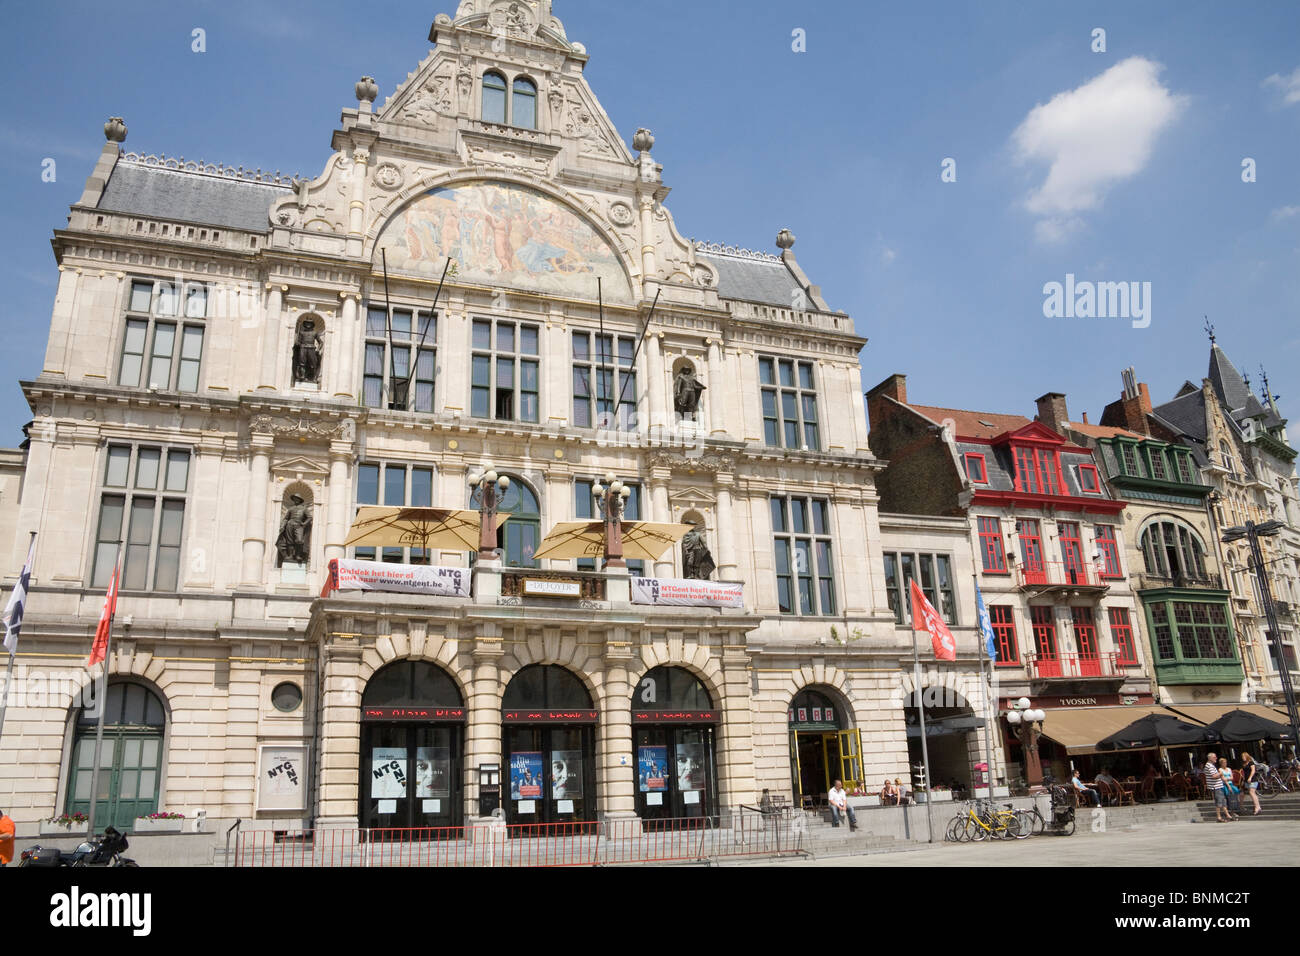 Ghent Belgium EU The former Royal Dutch Theatre dating to 1800's with other historic buildings in Sant Baafsplein Stock Photo